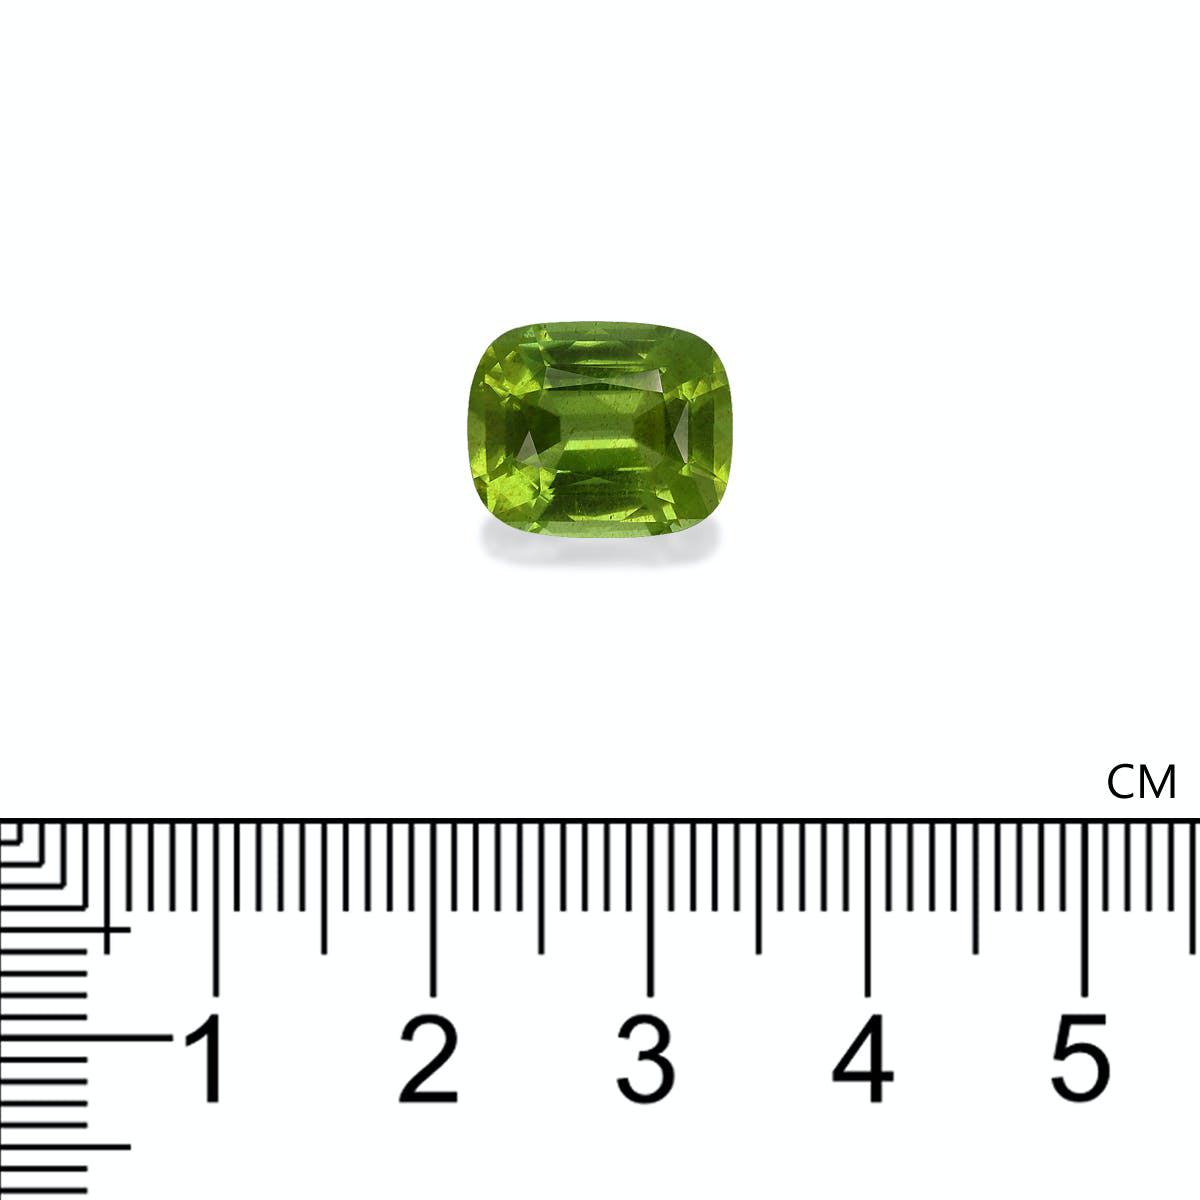 Picture of Pistachio Green Peridot 5.89ct - 12x10mm (PD0071)